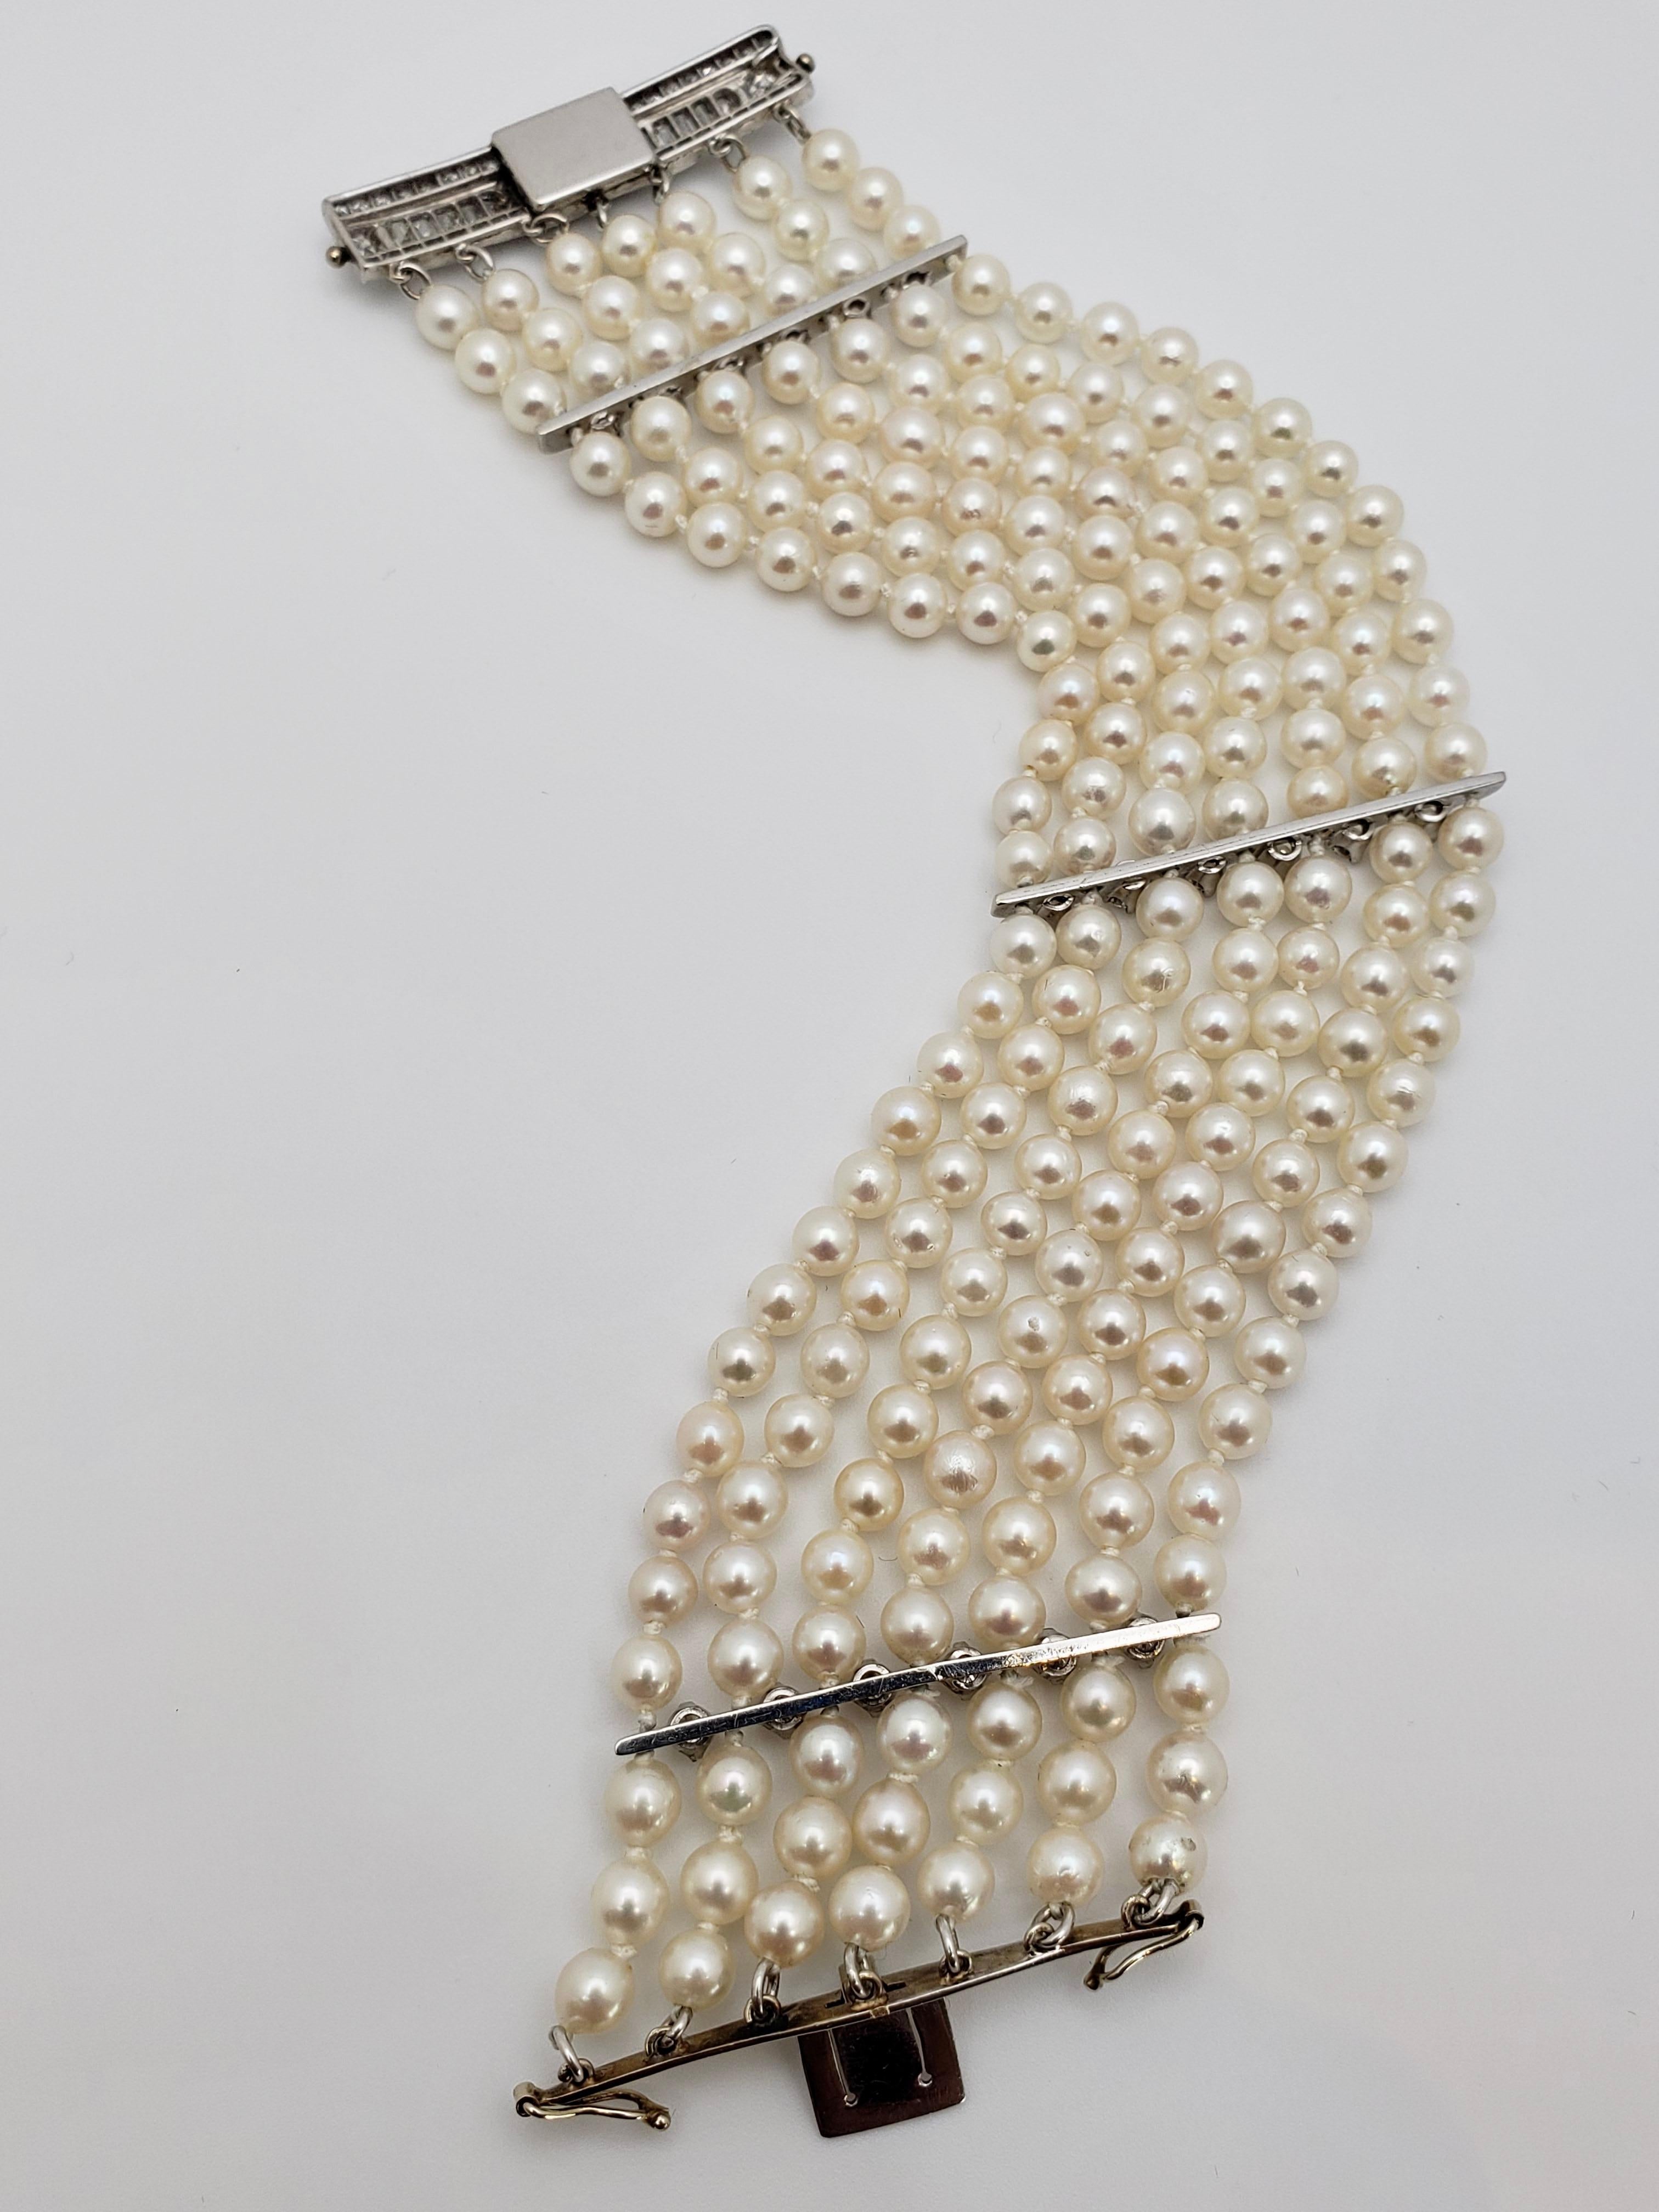 An original diamond platinum and pearl bracelet. This piece features seven rows of round cultured natural pearls each measuring approximately 4.50 mm in diameter. The platinum clasp and dividers are mounted with a total of 76 round single-cut